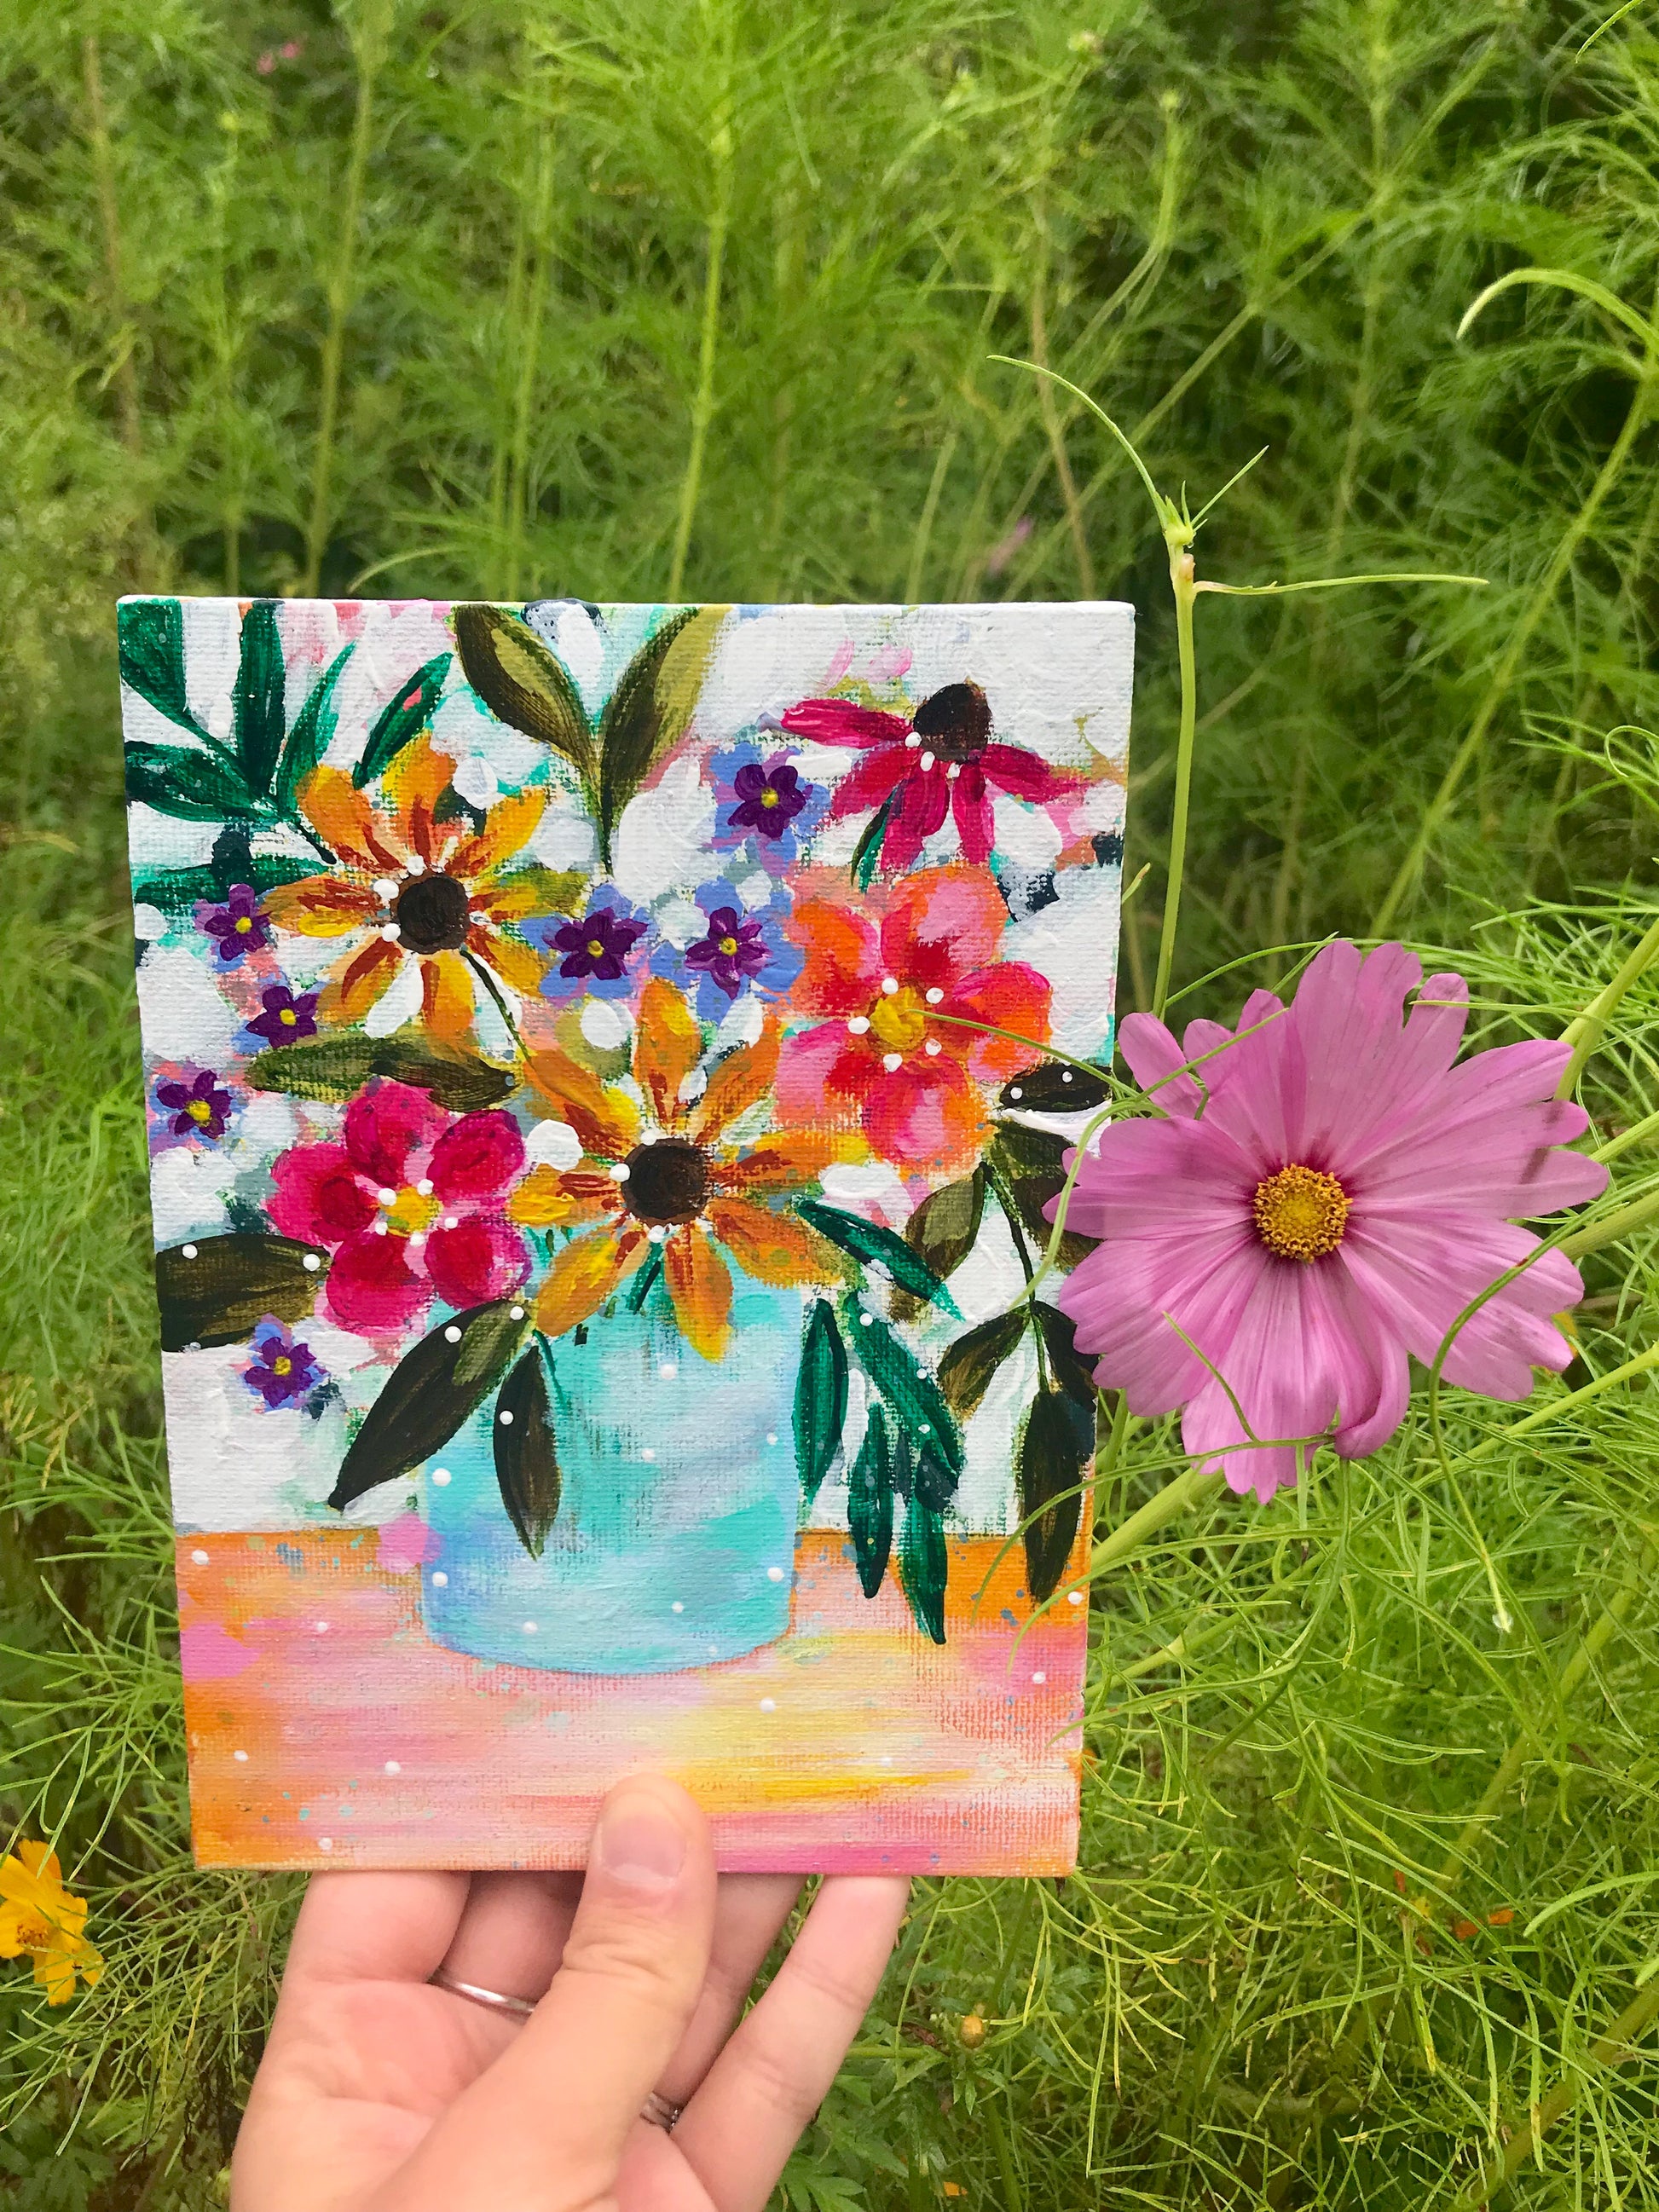 August Daily Painting Day 23 “Bouquet of Sunshine" 5x7 inch Floral Original - Bethany Joy Art